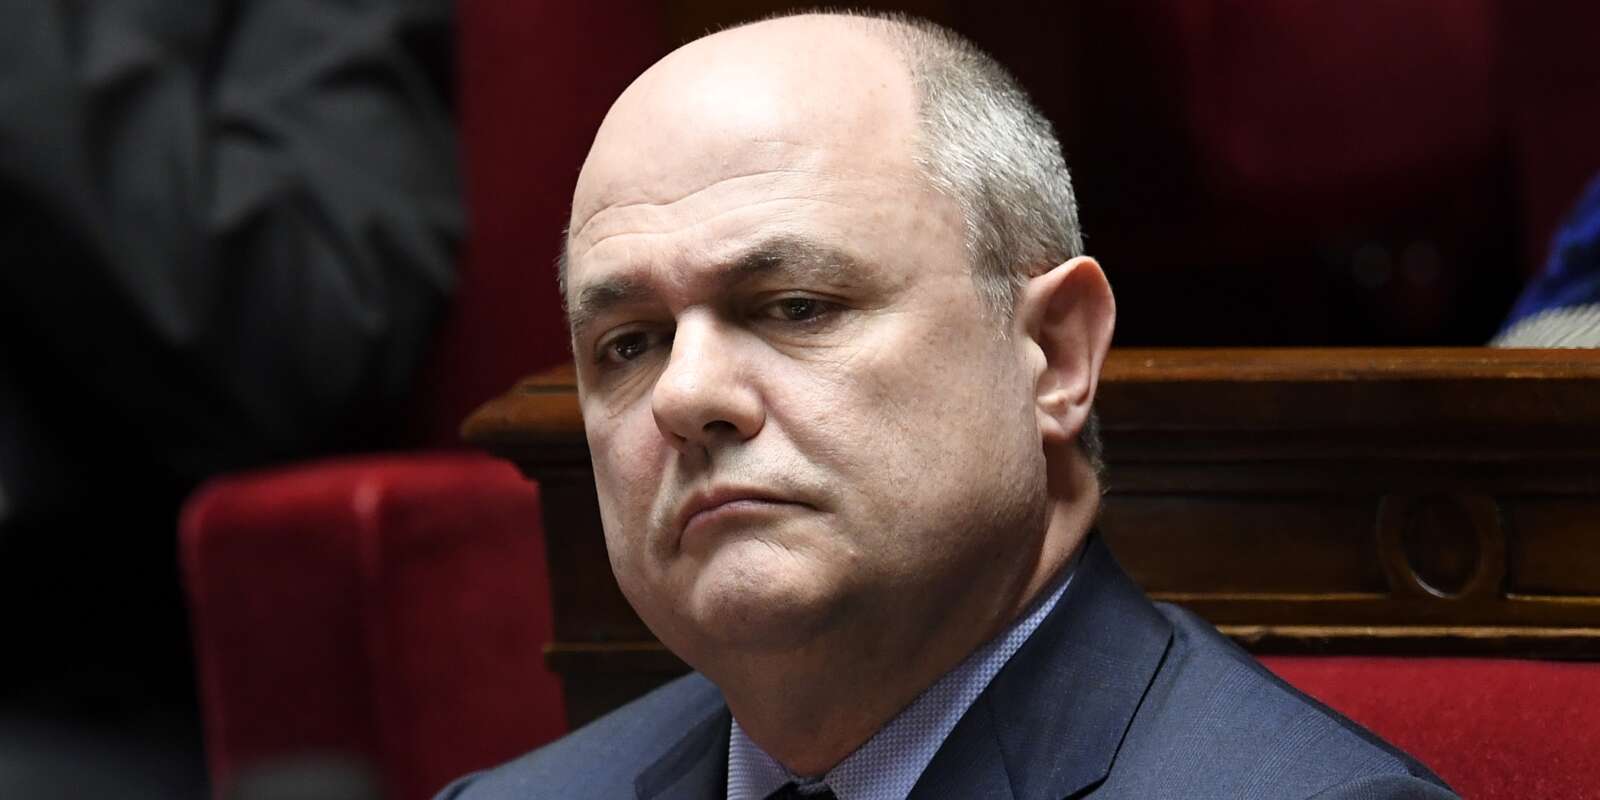 (FILES) This file photo taken on December 20, 2016 shows French Interior Minister Bruno Le Roux attending a session of questions to the government at the National Assembly in Paris. France's Interior Minister Bruno Le Roux was fighting for political survival on March 21, 2017 after it emerged that he hired his two teenage daughters as parliamentary assistants, earning comparisons with scandal-hit presidential hopeful Francois Fillon. Le Roux was to meet with Socialist Prime Minister Bernard Cazeneuve to provide explanations over the latest revelations to engulf an already embattled French political class. / AFP / Bertrand GUAY